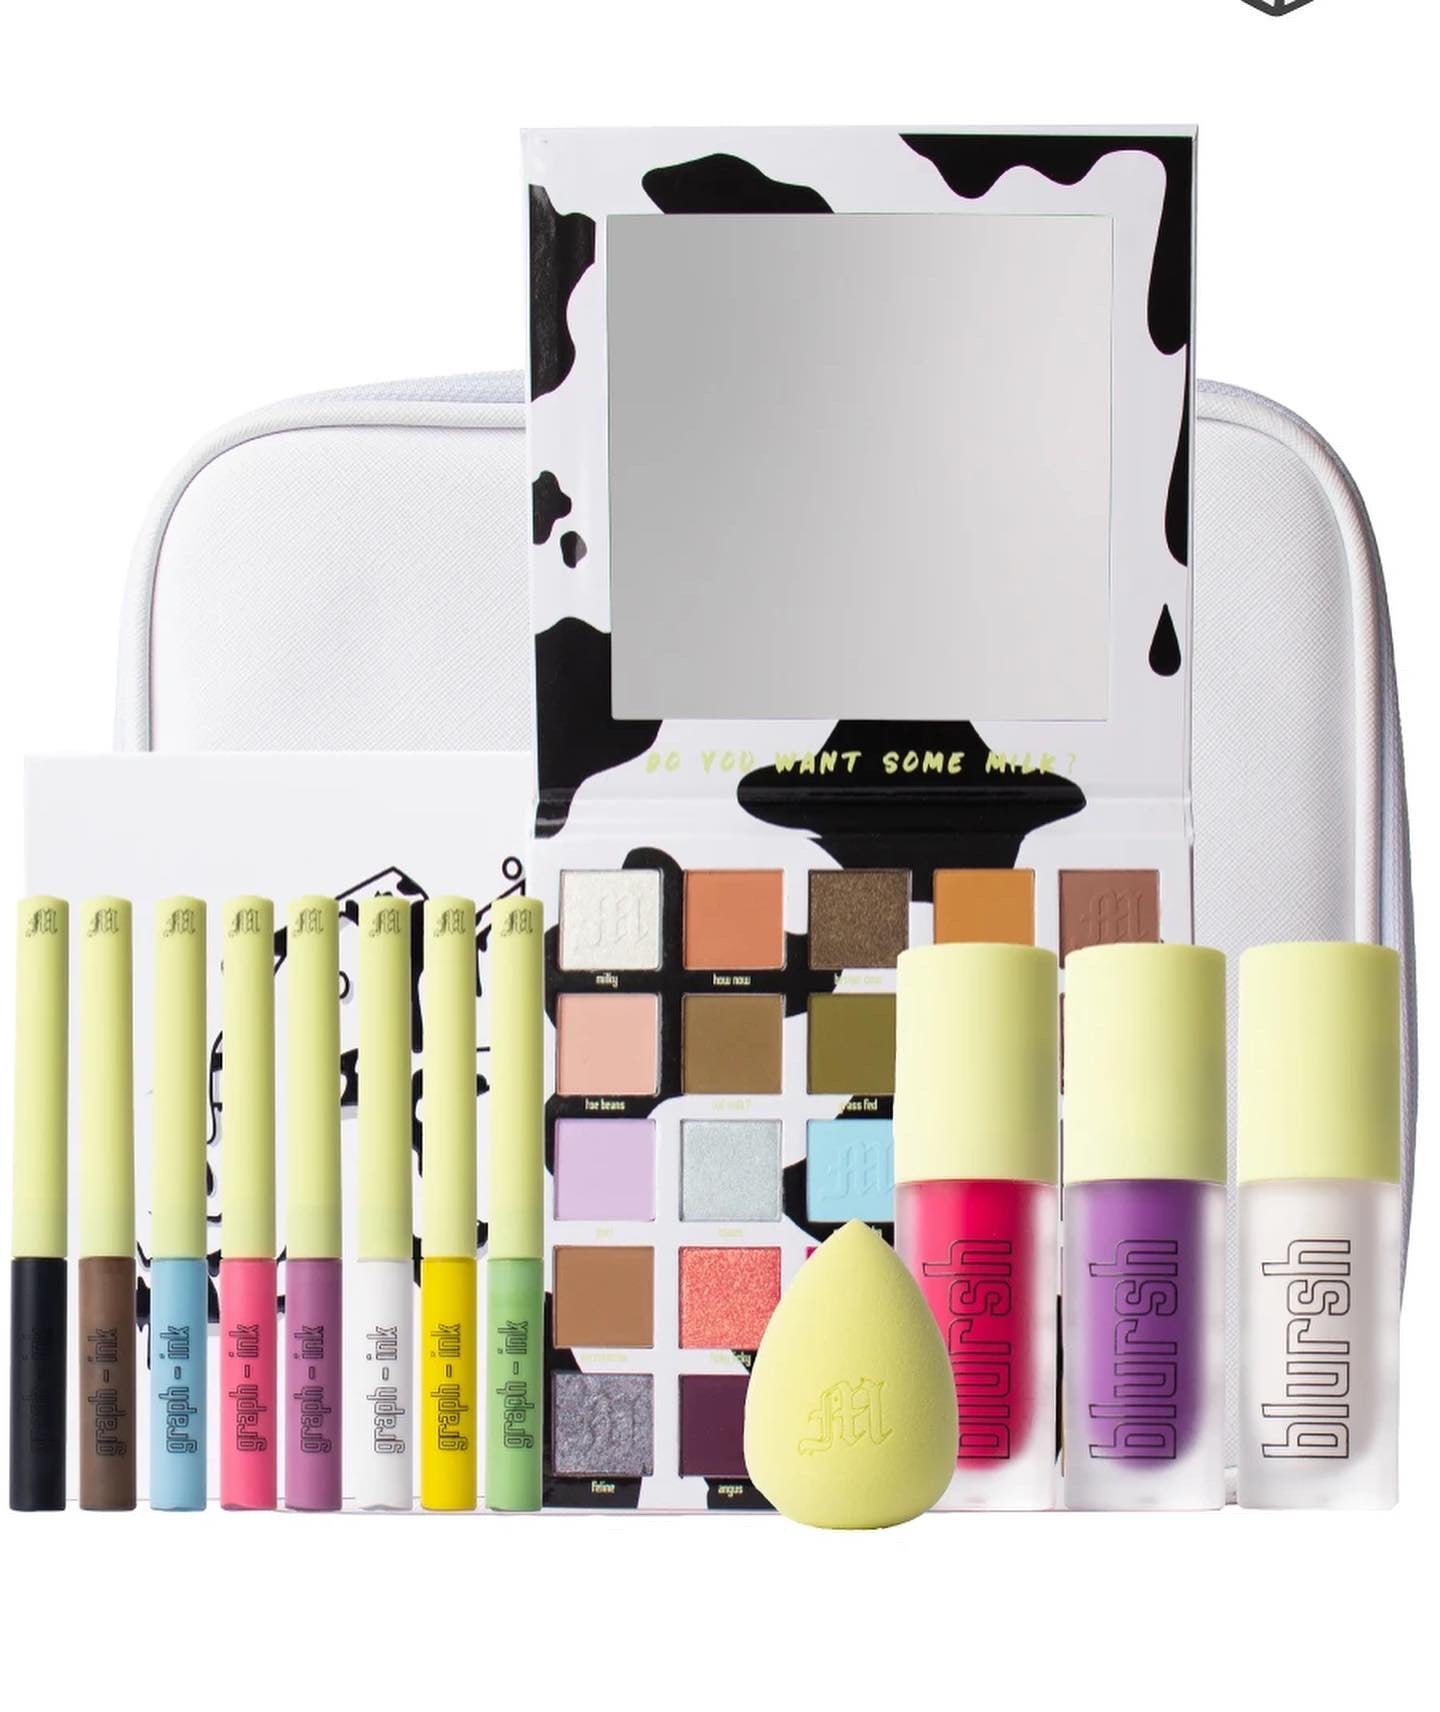 MADE BY MITCHELL, NEW RELEASE!!! FLASH DEAL THE MILK COLLECTION MEGA VALUE BUNDLE